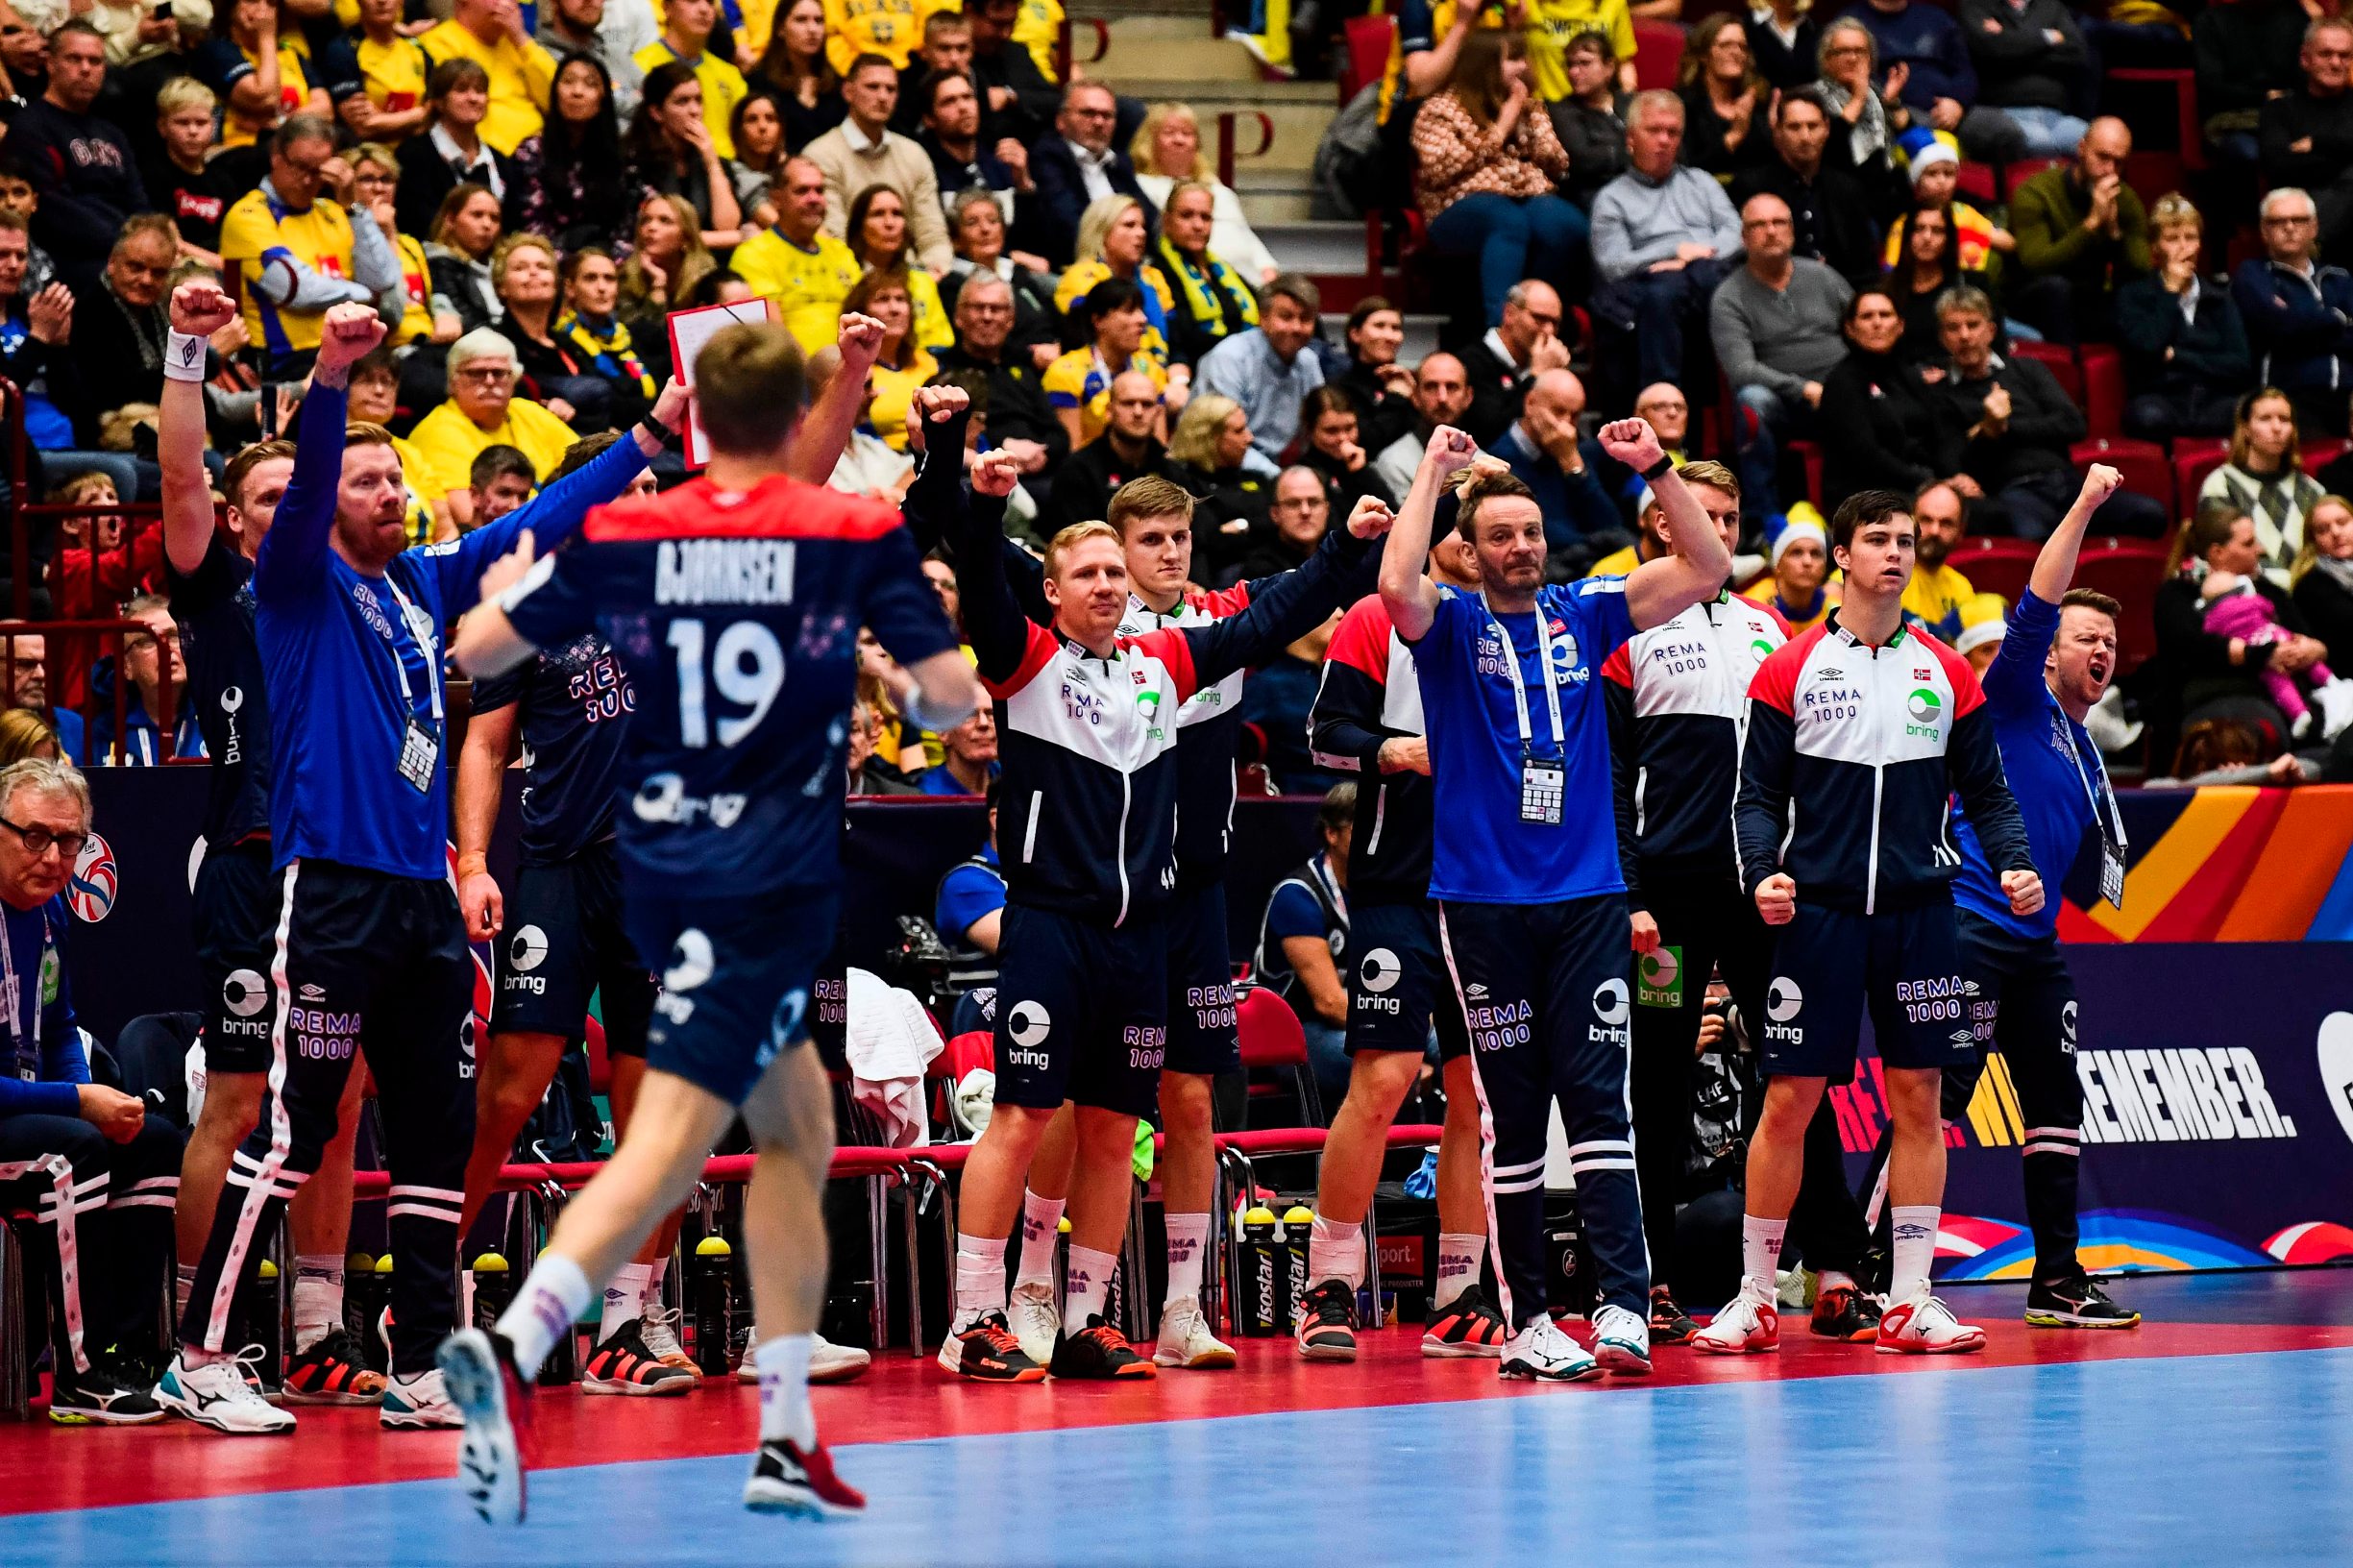 Norway's players celebrate after a goal during the Men's European Handball Championship, main round match between Norway and Sweden in Malmoe, Sweden on January 19, 2020. (Photo by Jonathan NACKSTRAND / AFP)